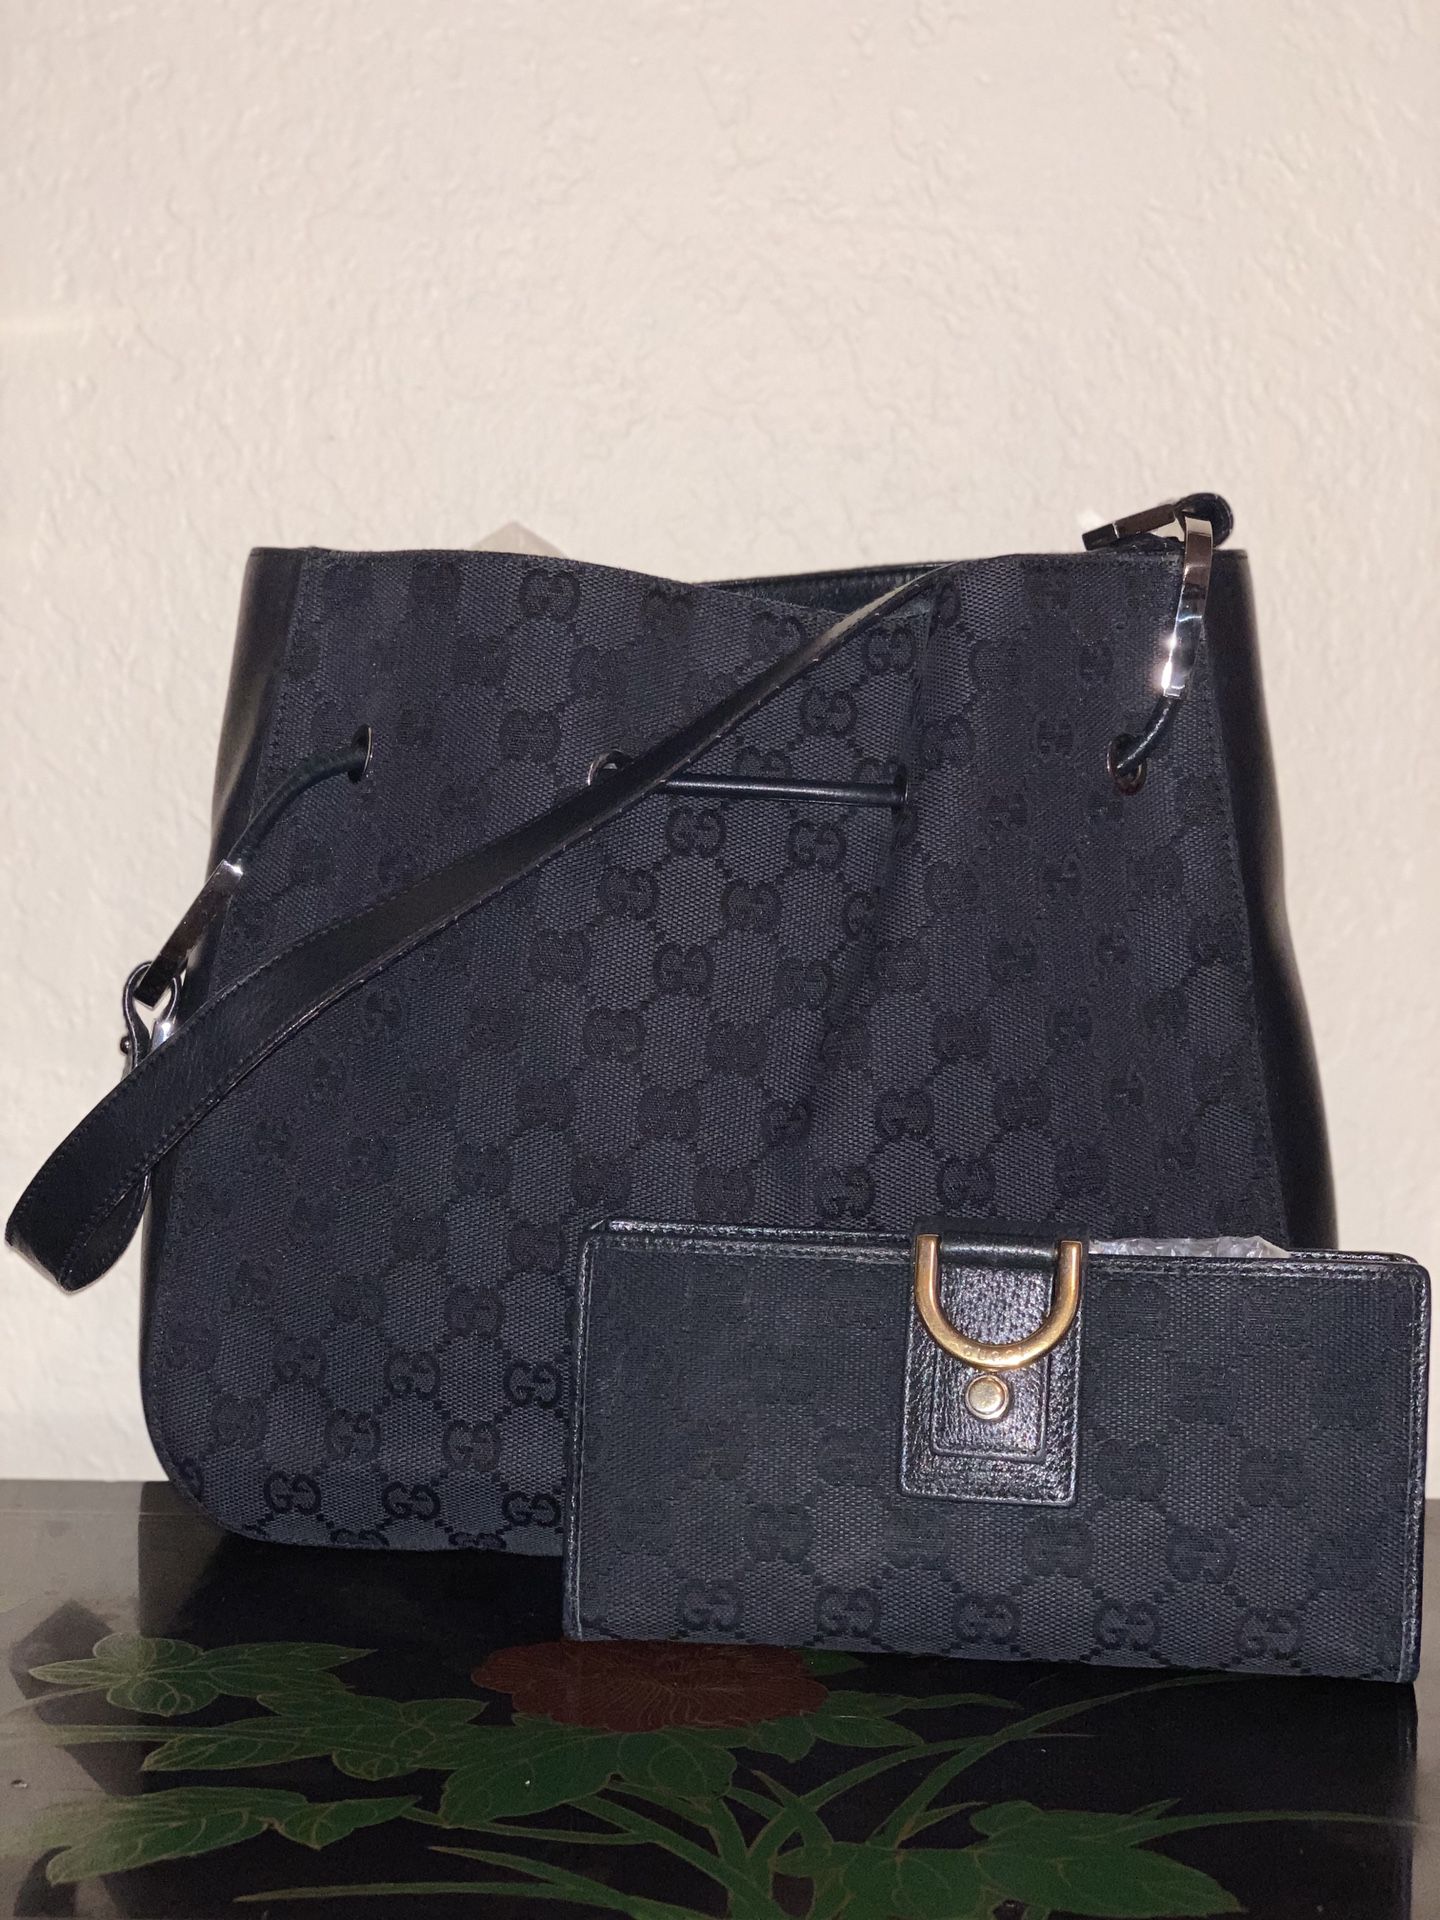 Authentic Gucci Bag and Wallet Set